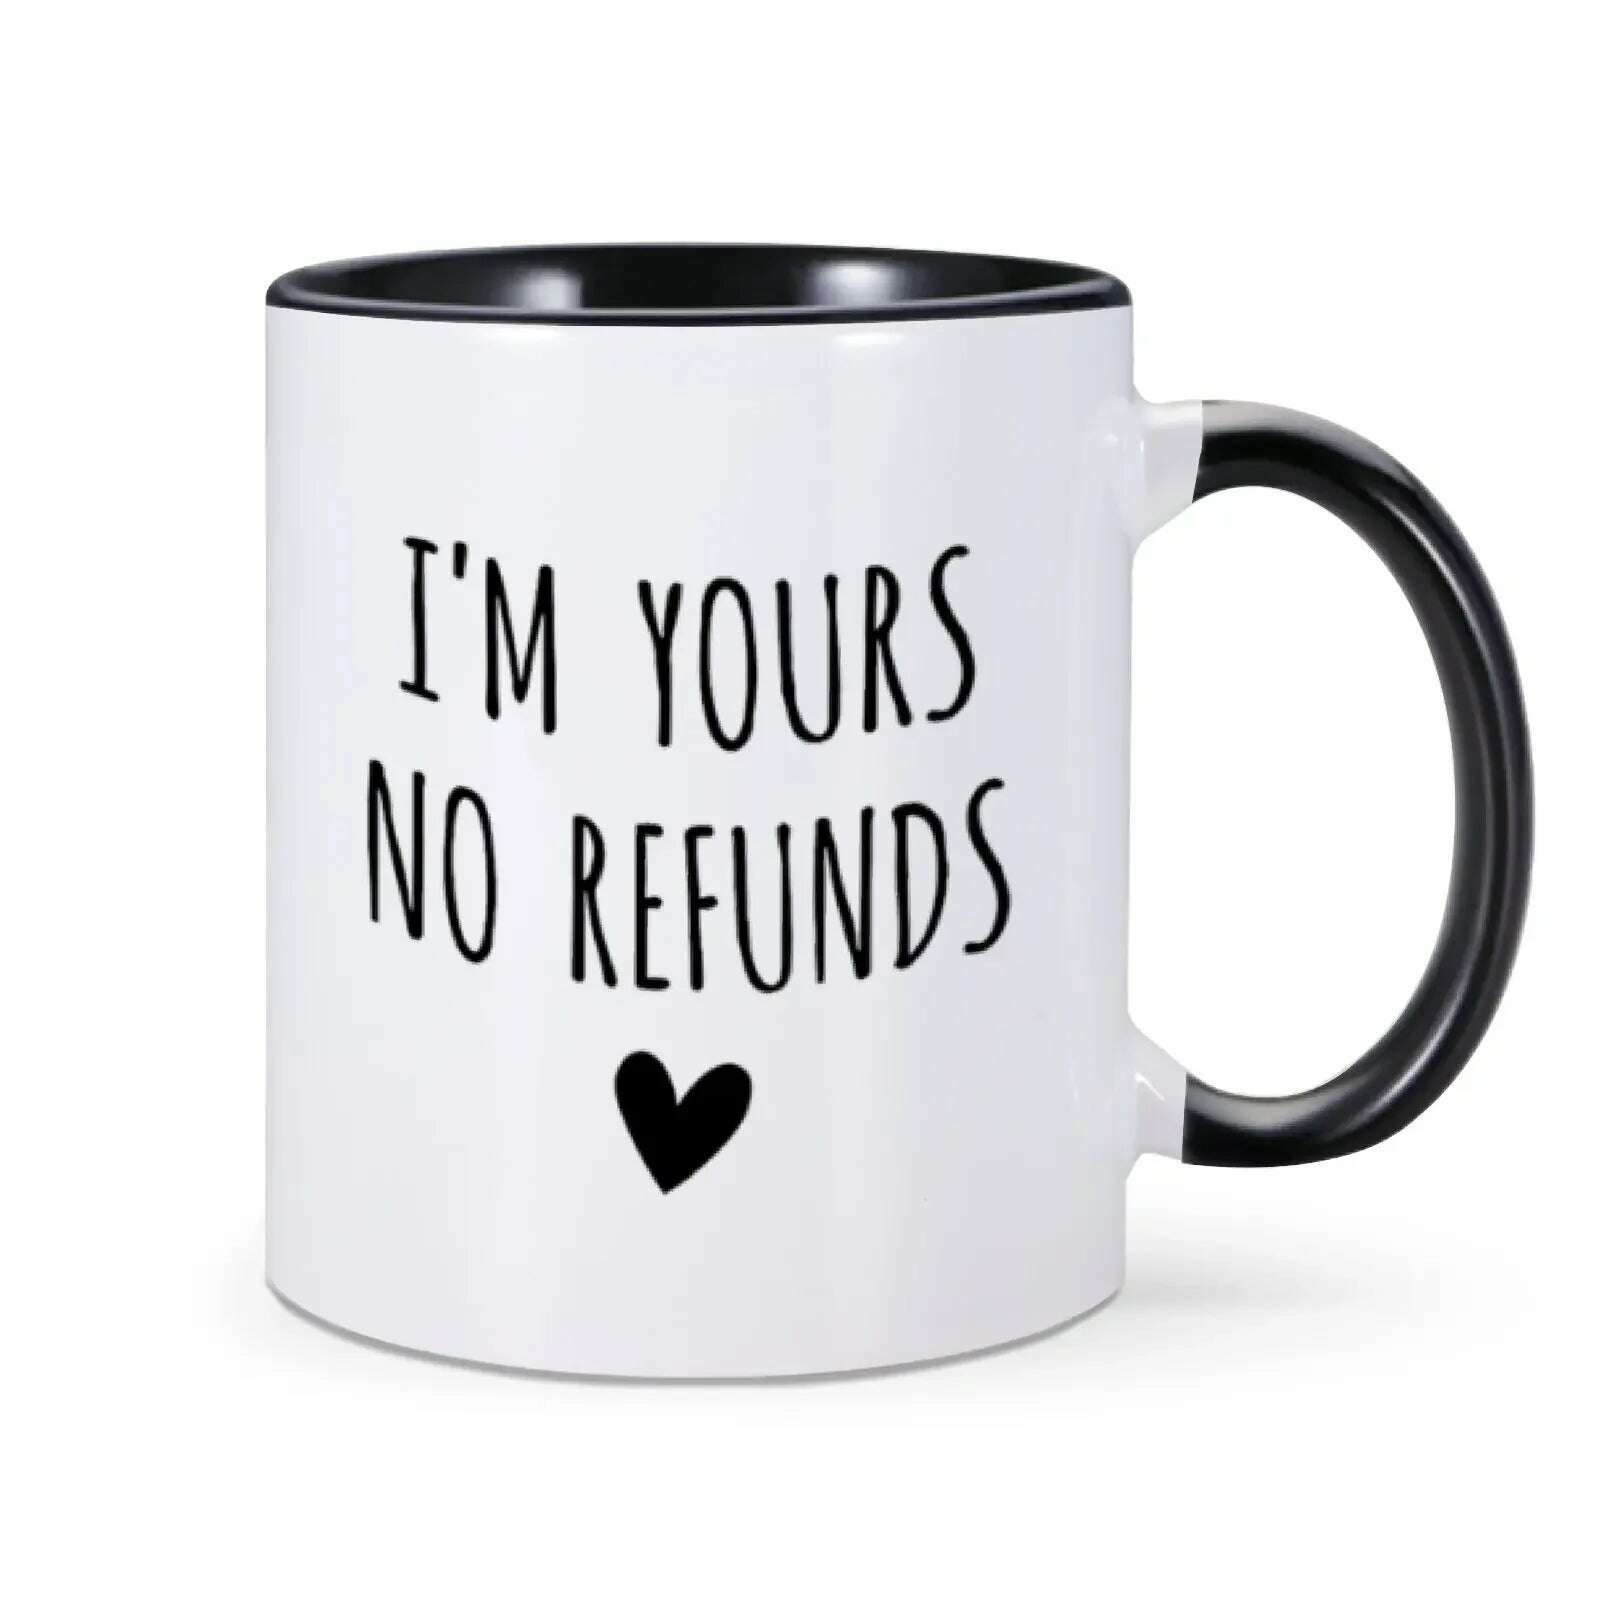 KIMLUD, I'm Yours No Refunds Mug Valentine's Day Mug Valentines Gift for Him Her Husband Wife Funny Coffee Cup for Women Men 11 Oz Mug, Black / 11oz, KIMLUD Women's Clothes